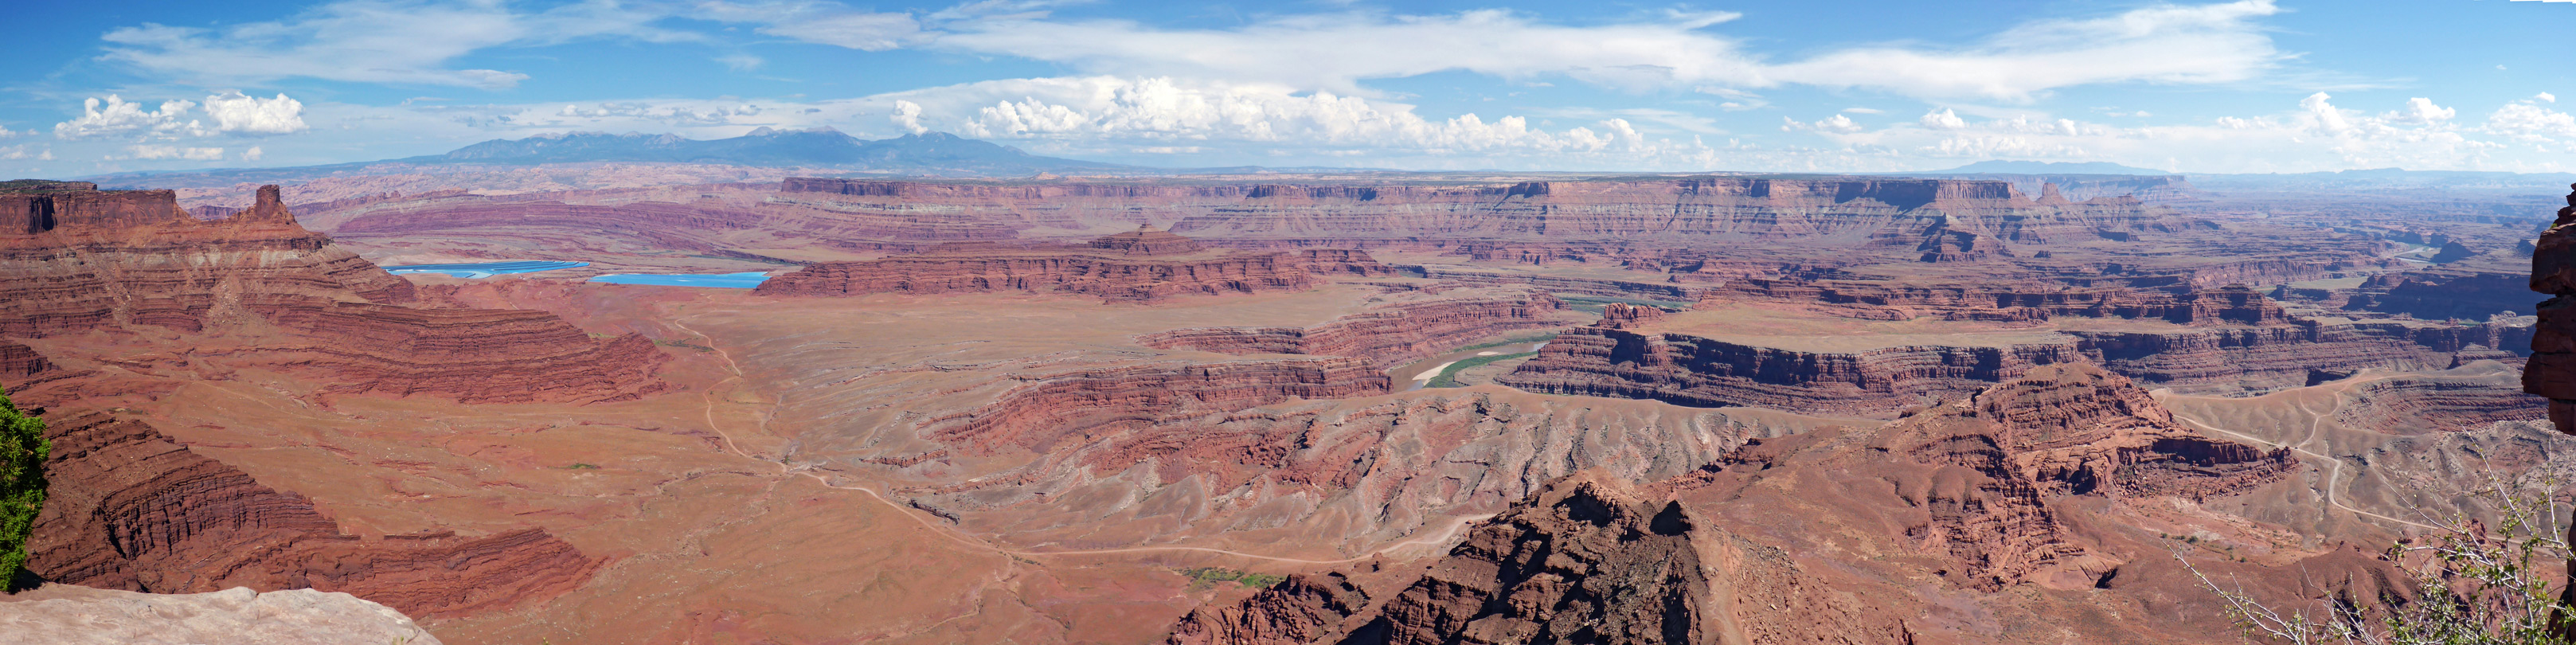 East of Dead Horse Point